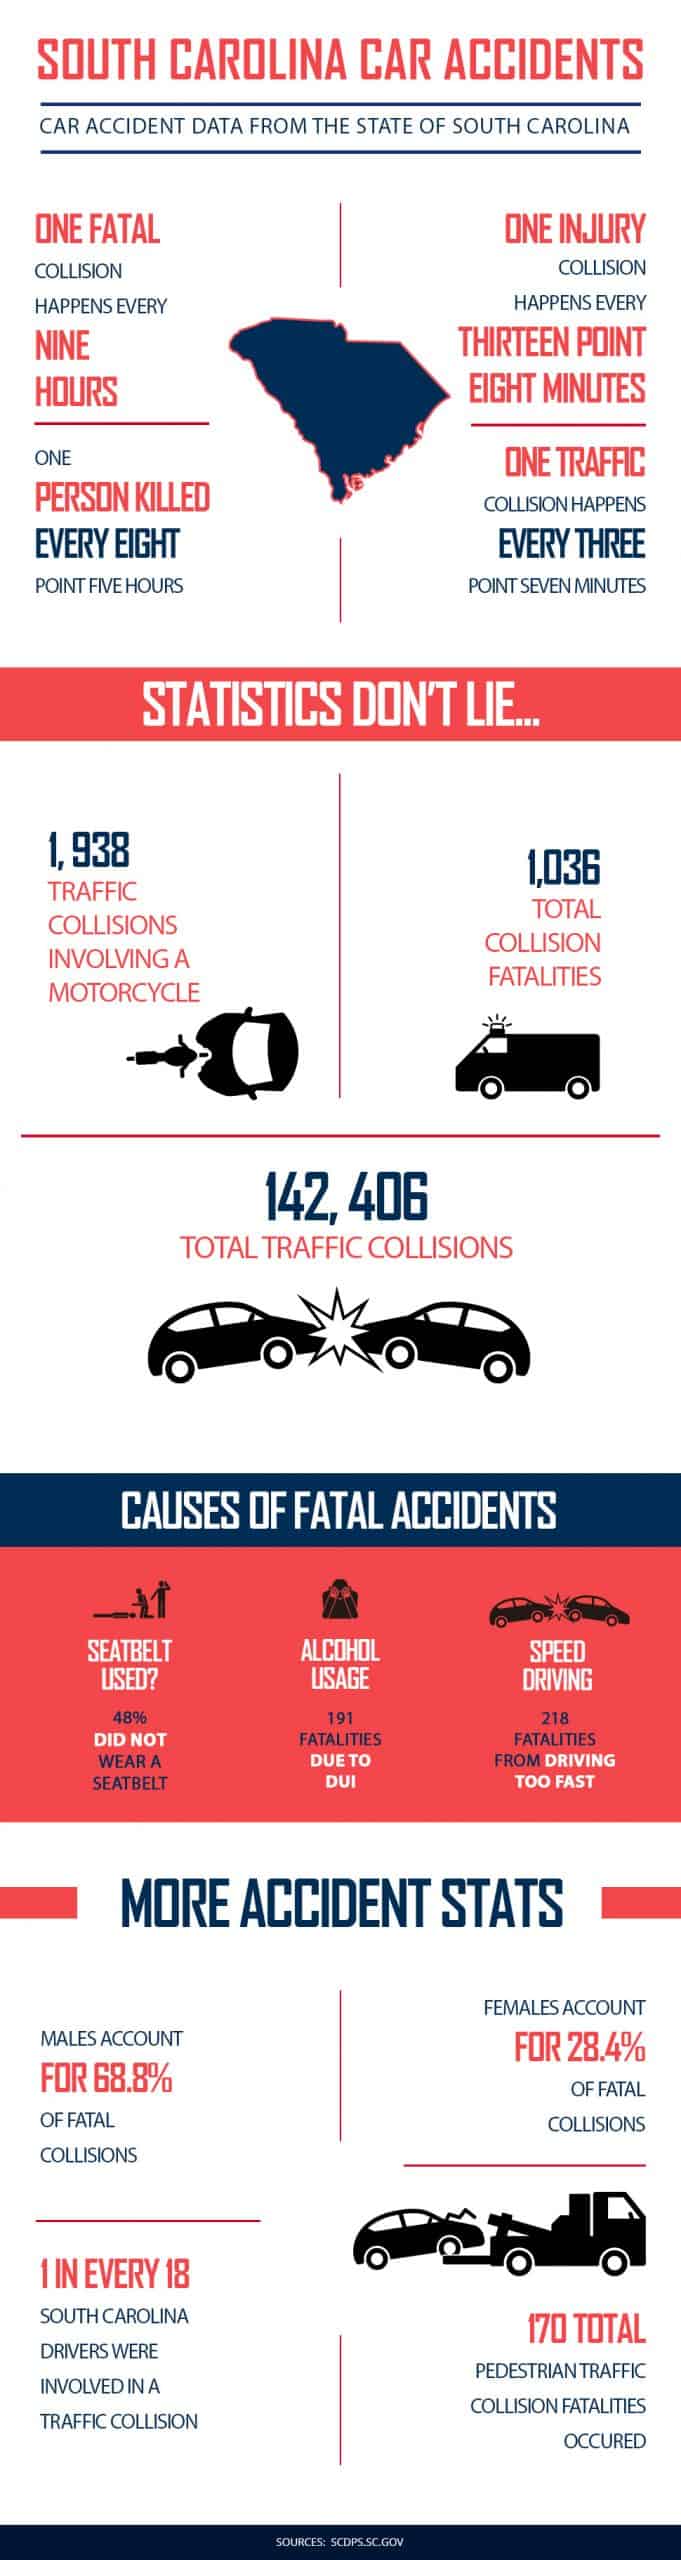 South Carolina Car Accidents Infographic